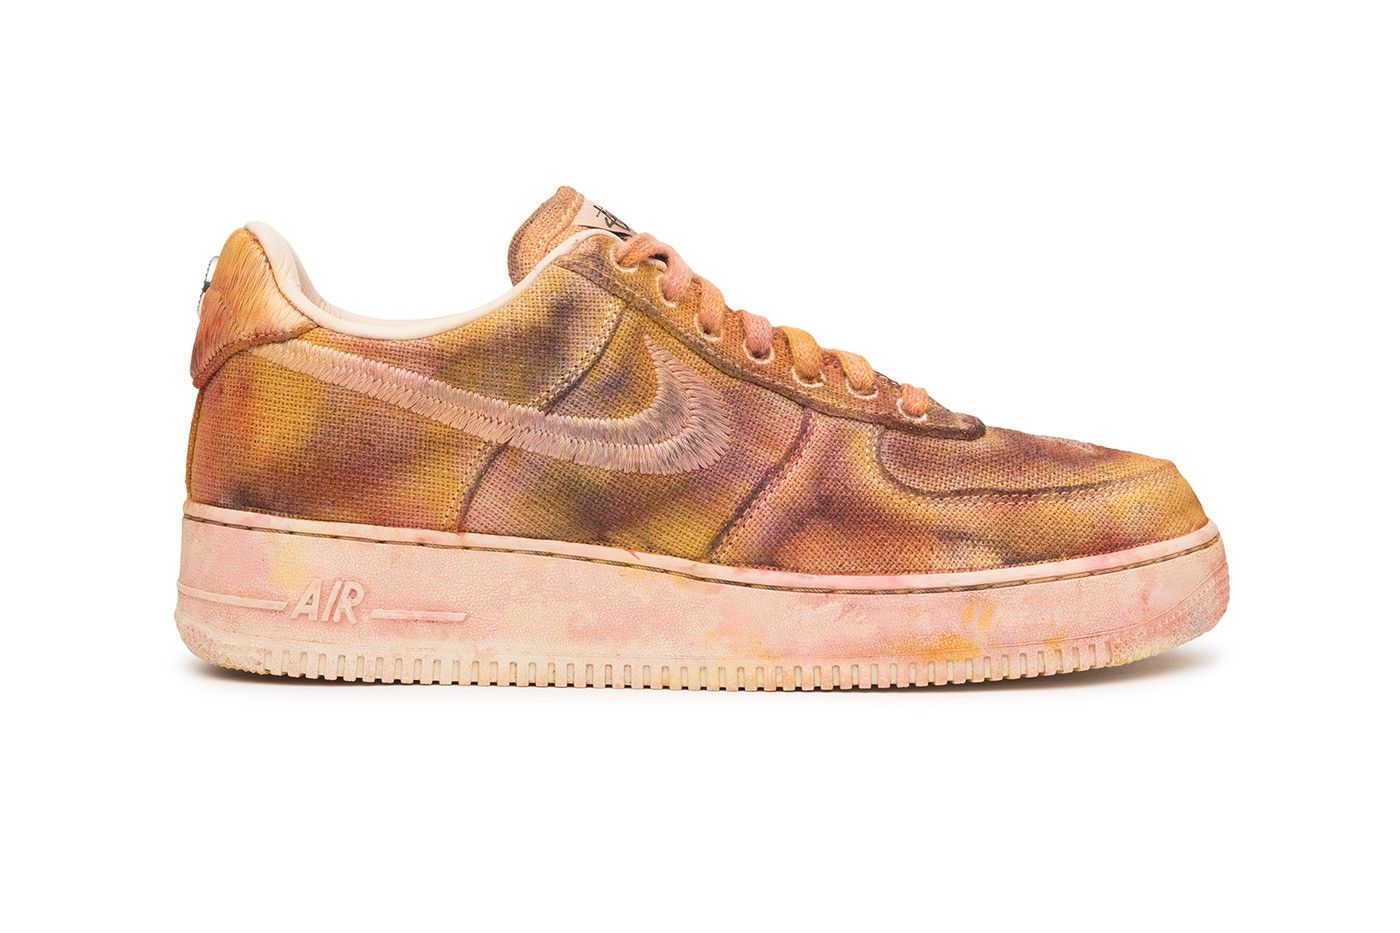 A Closer Look at Stussy's Hand-Dyed Nike Air Force 1 Collaboration